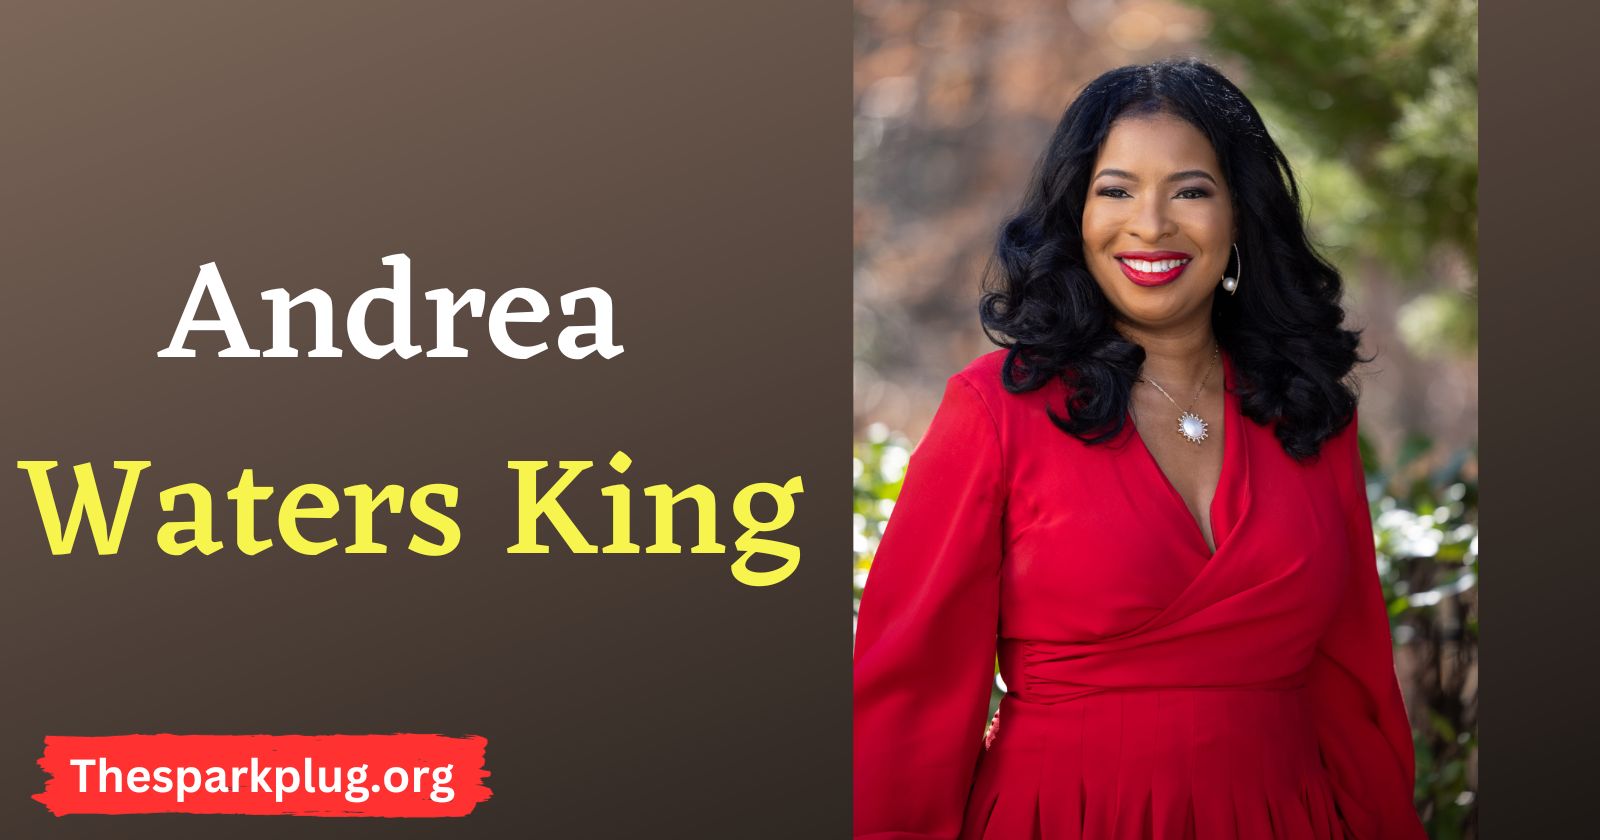 Arndrea Waters King Wikipedia, Age, Parents, Networth, Husband, Daughter, Mother, Spouse & More